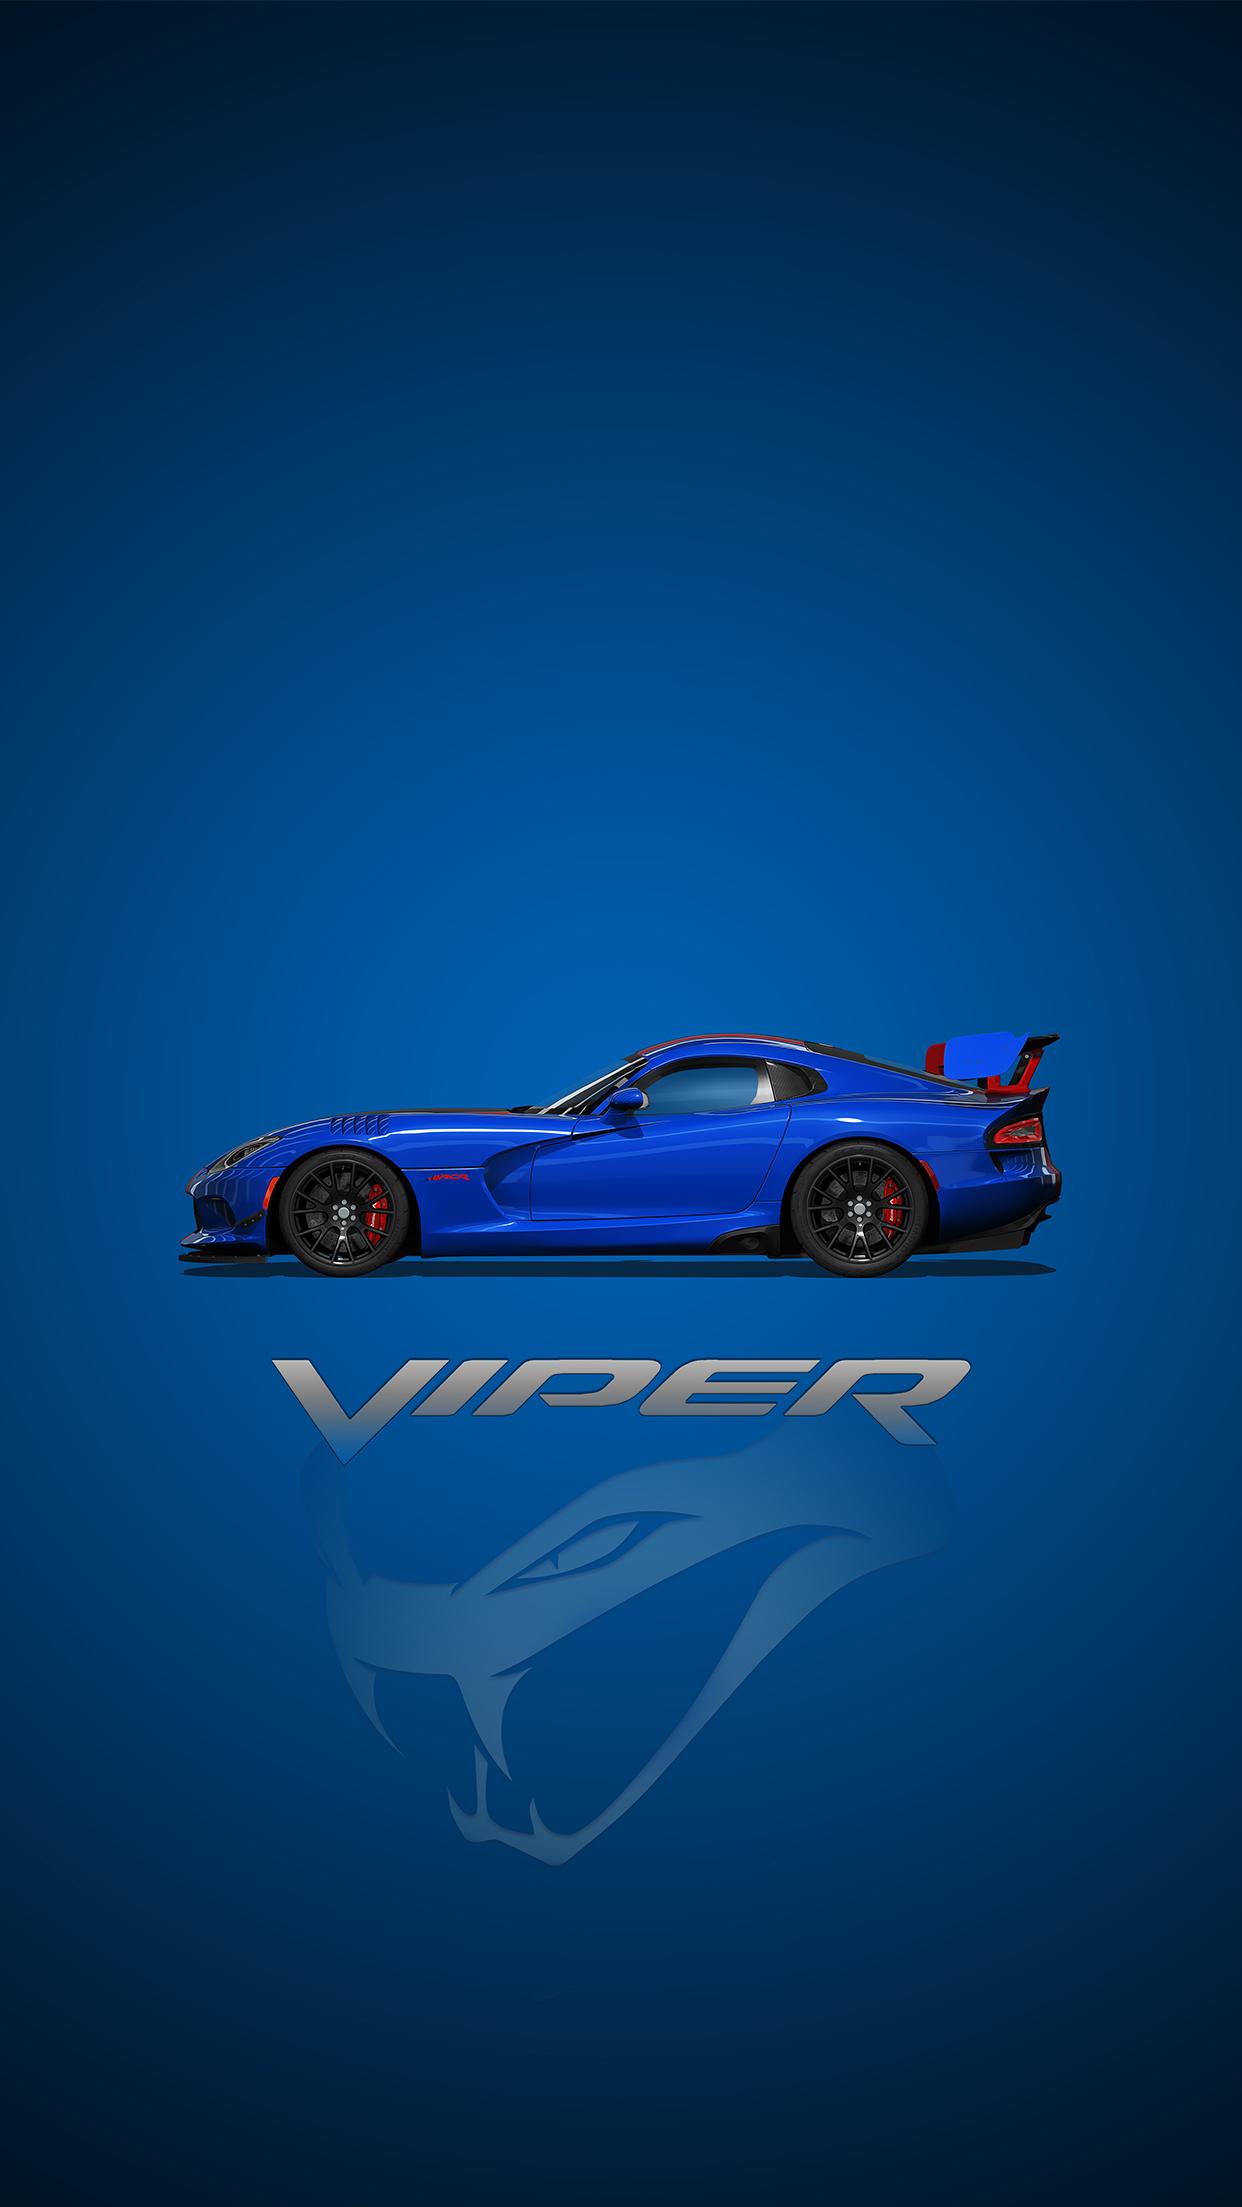 Dodge Viper Acr By Need4swede